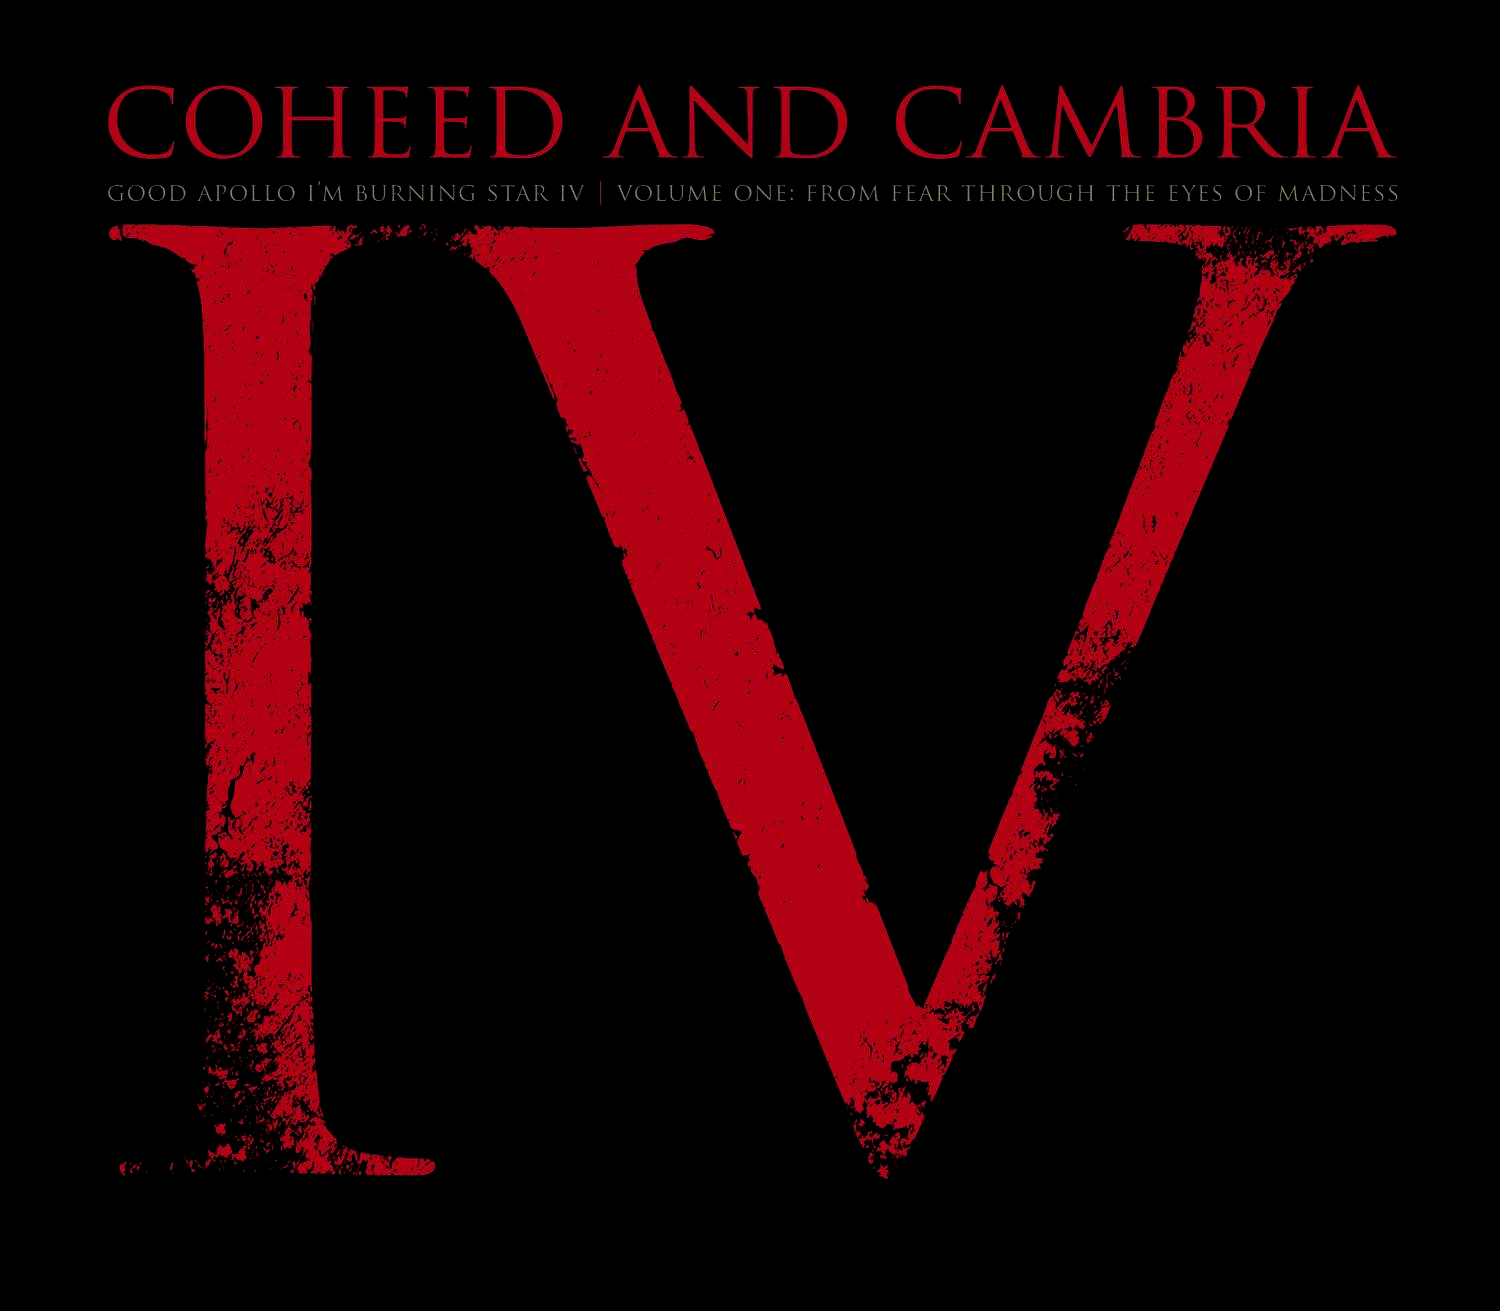 The name Coheed and Cambria and the Roman numeral four in blood red against a black background.